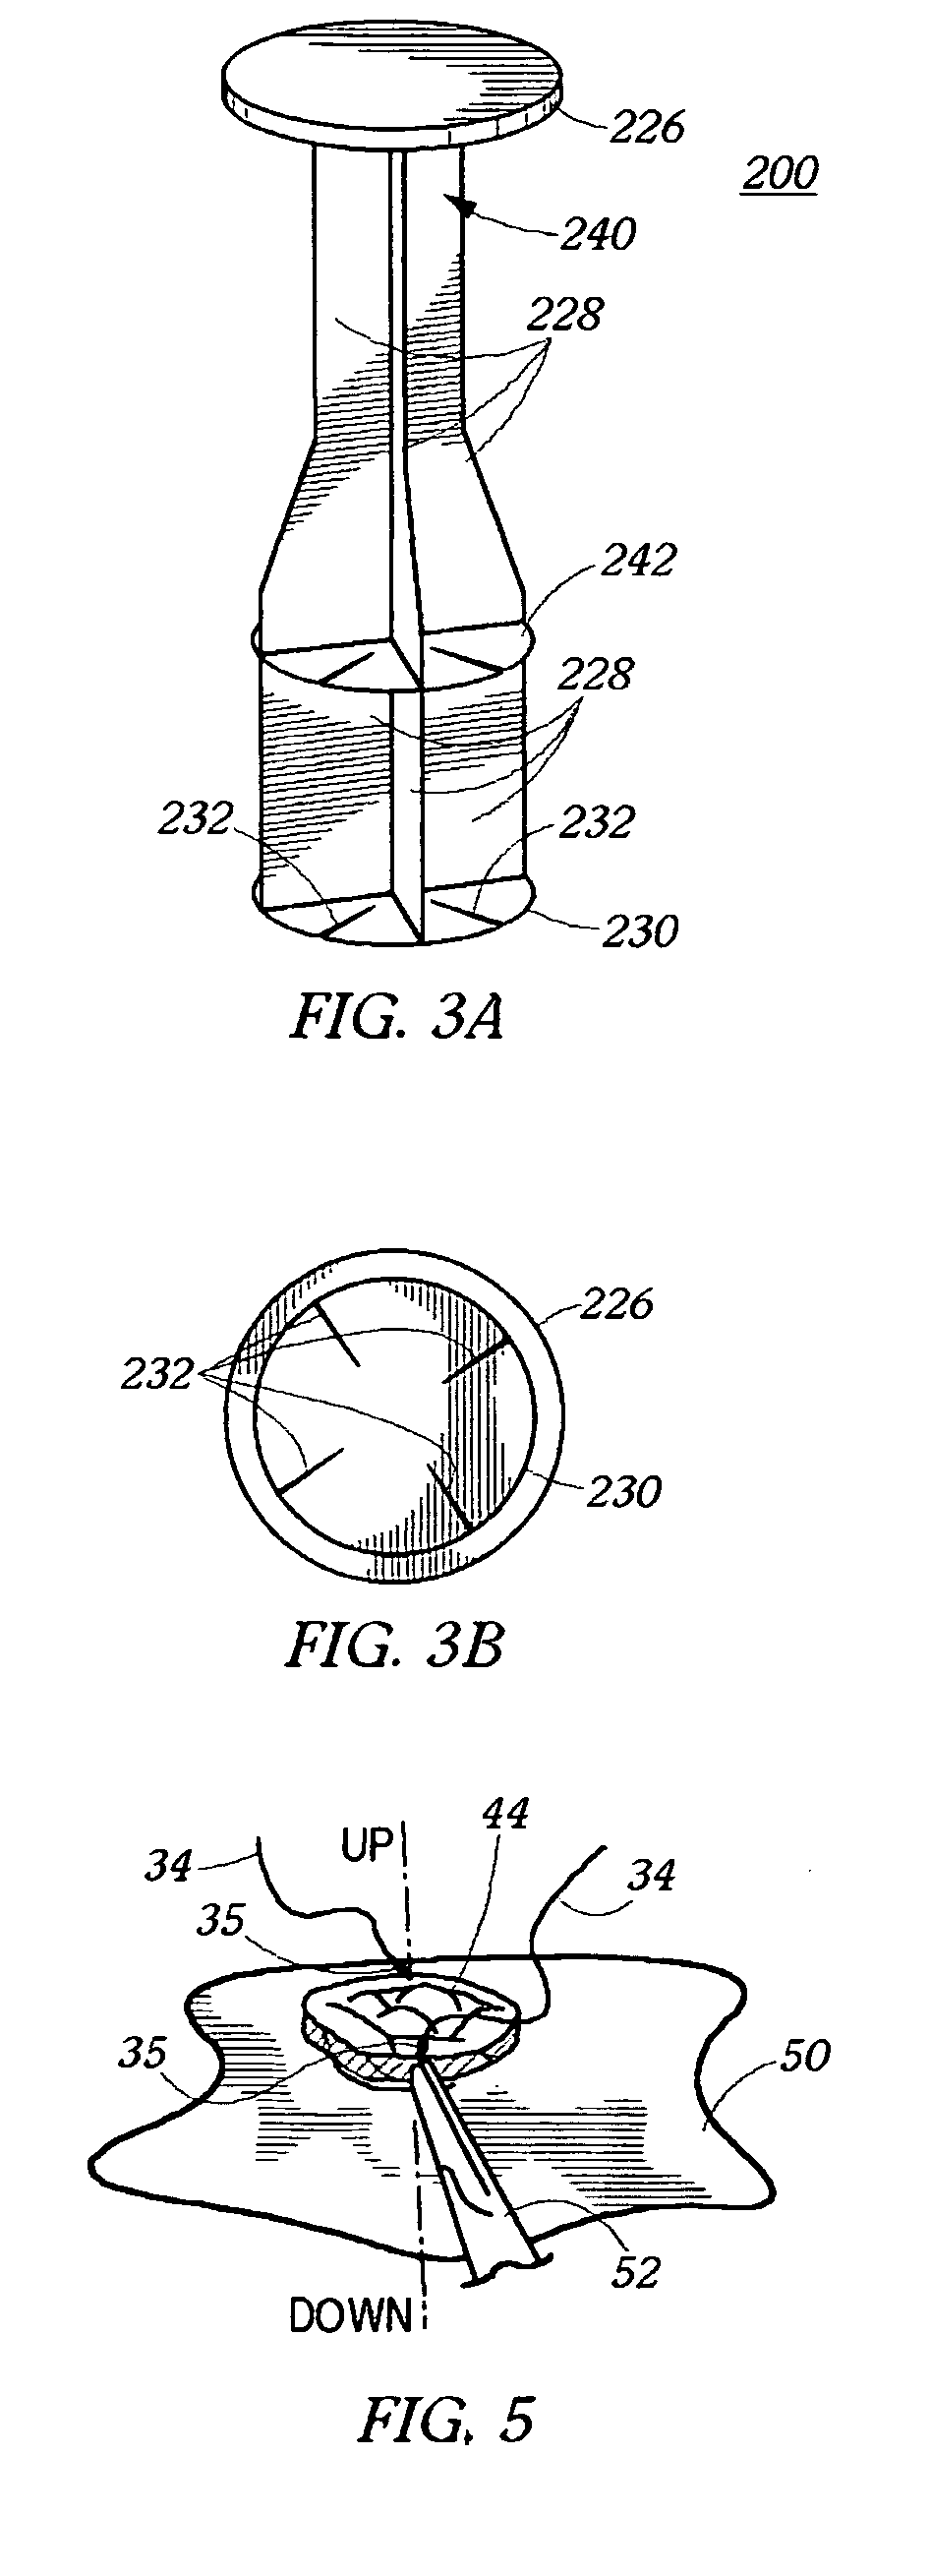 Method and device for umbilicus protection during abdominal surgery